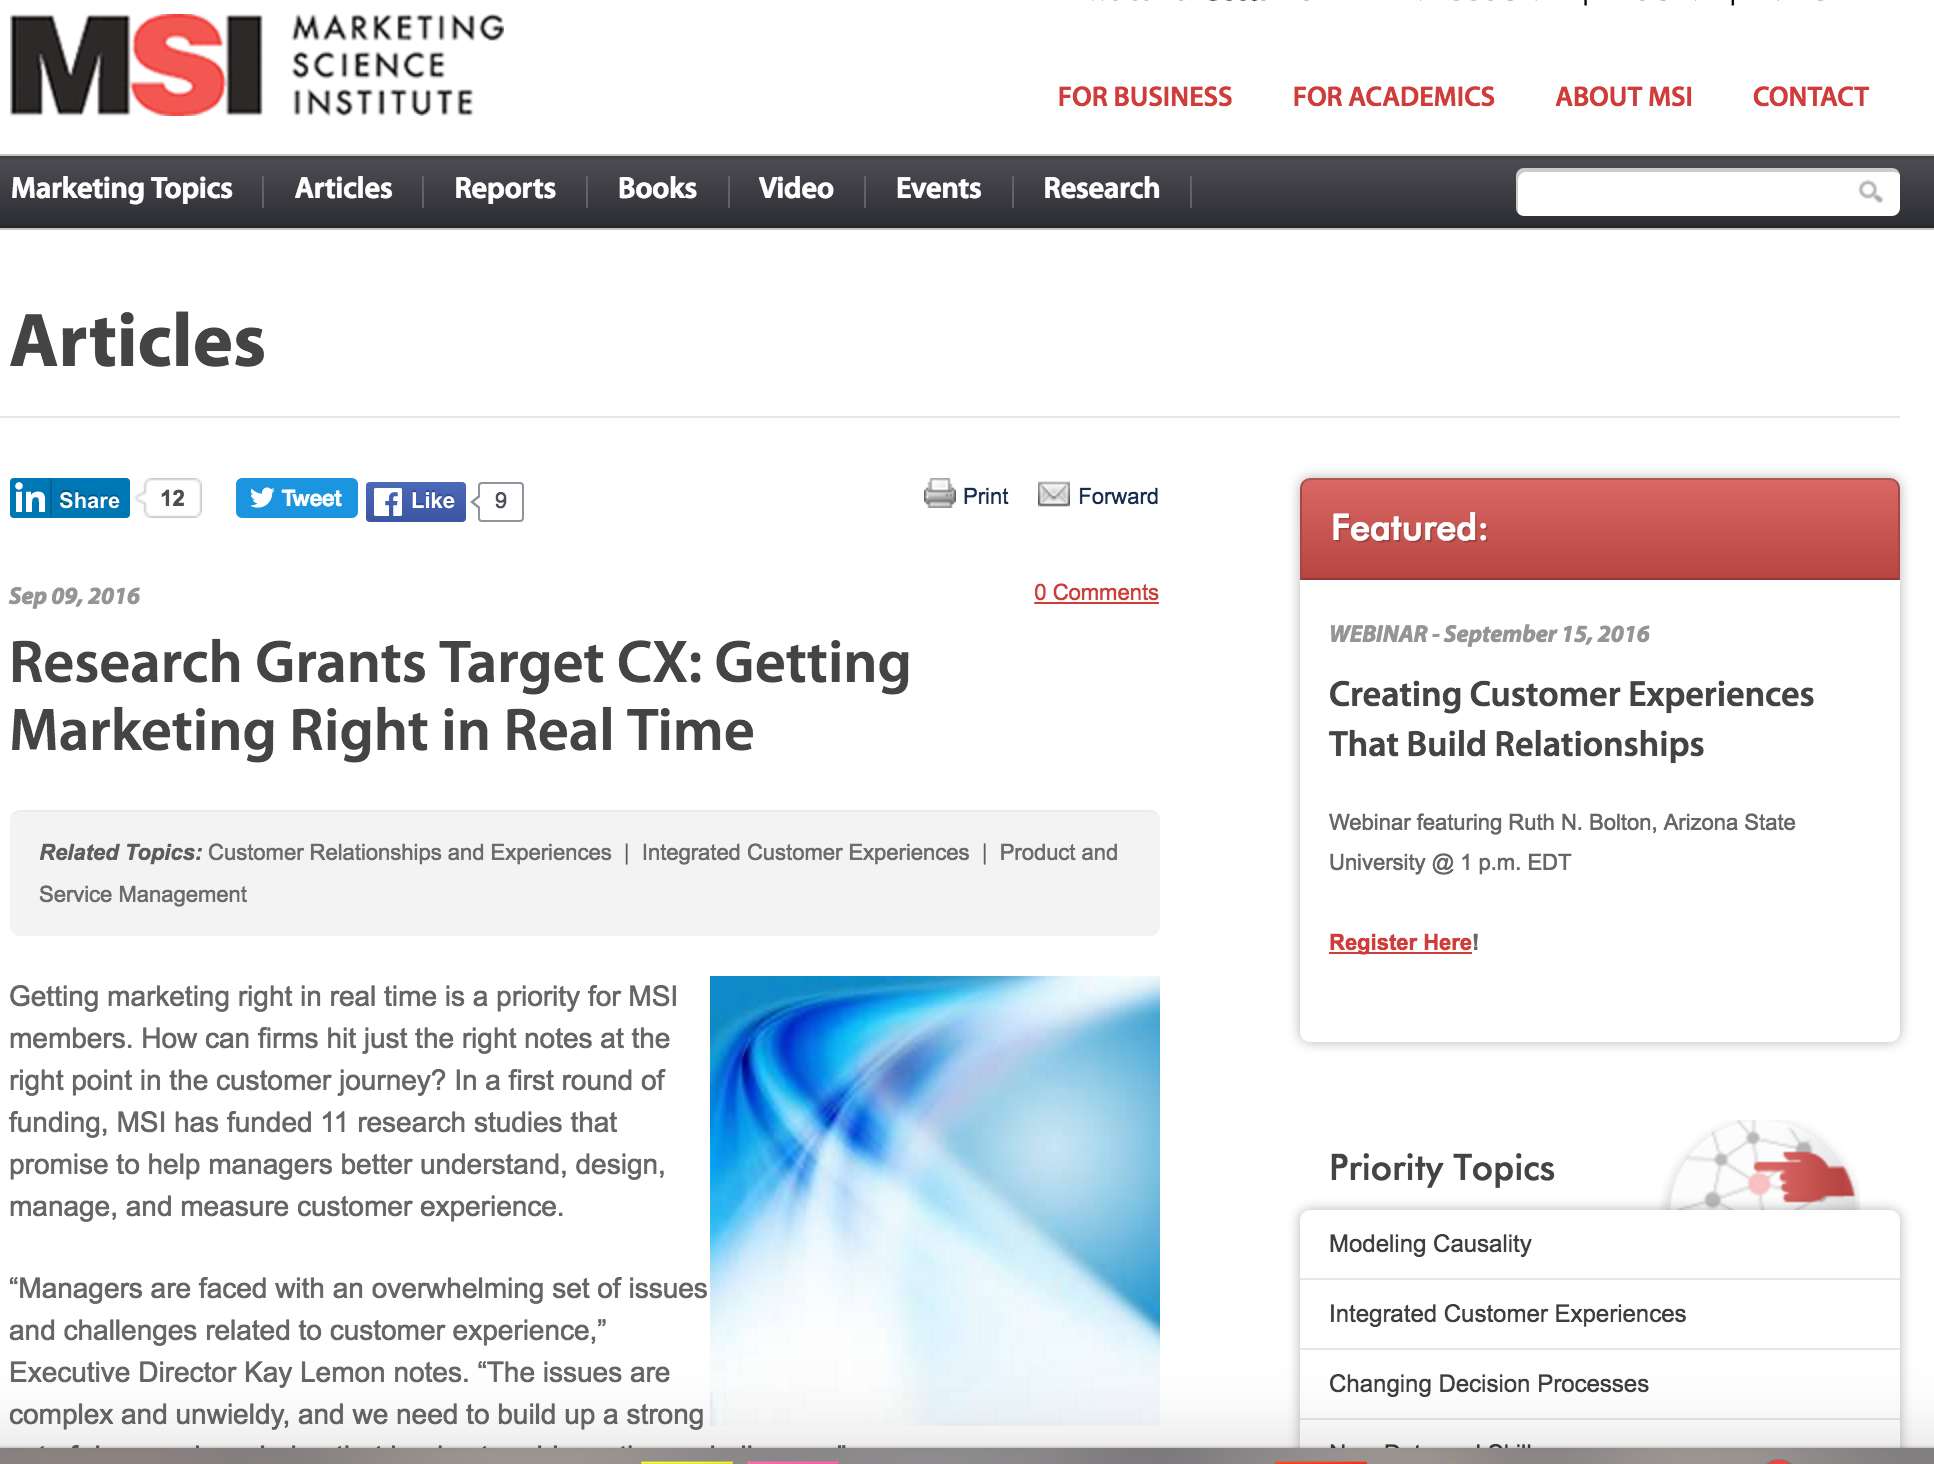 Article by the Marketing Science Institute - Research Grant Target CX